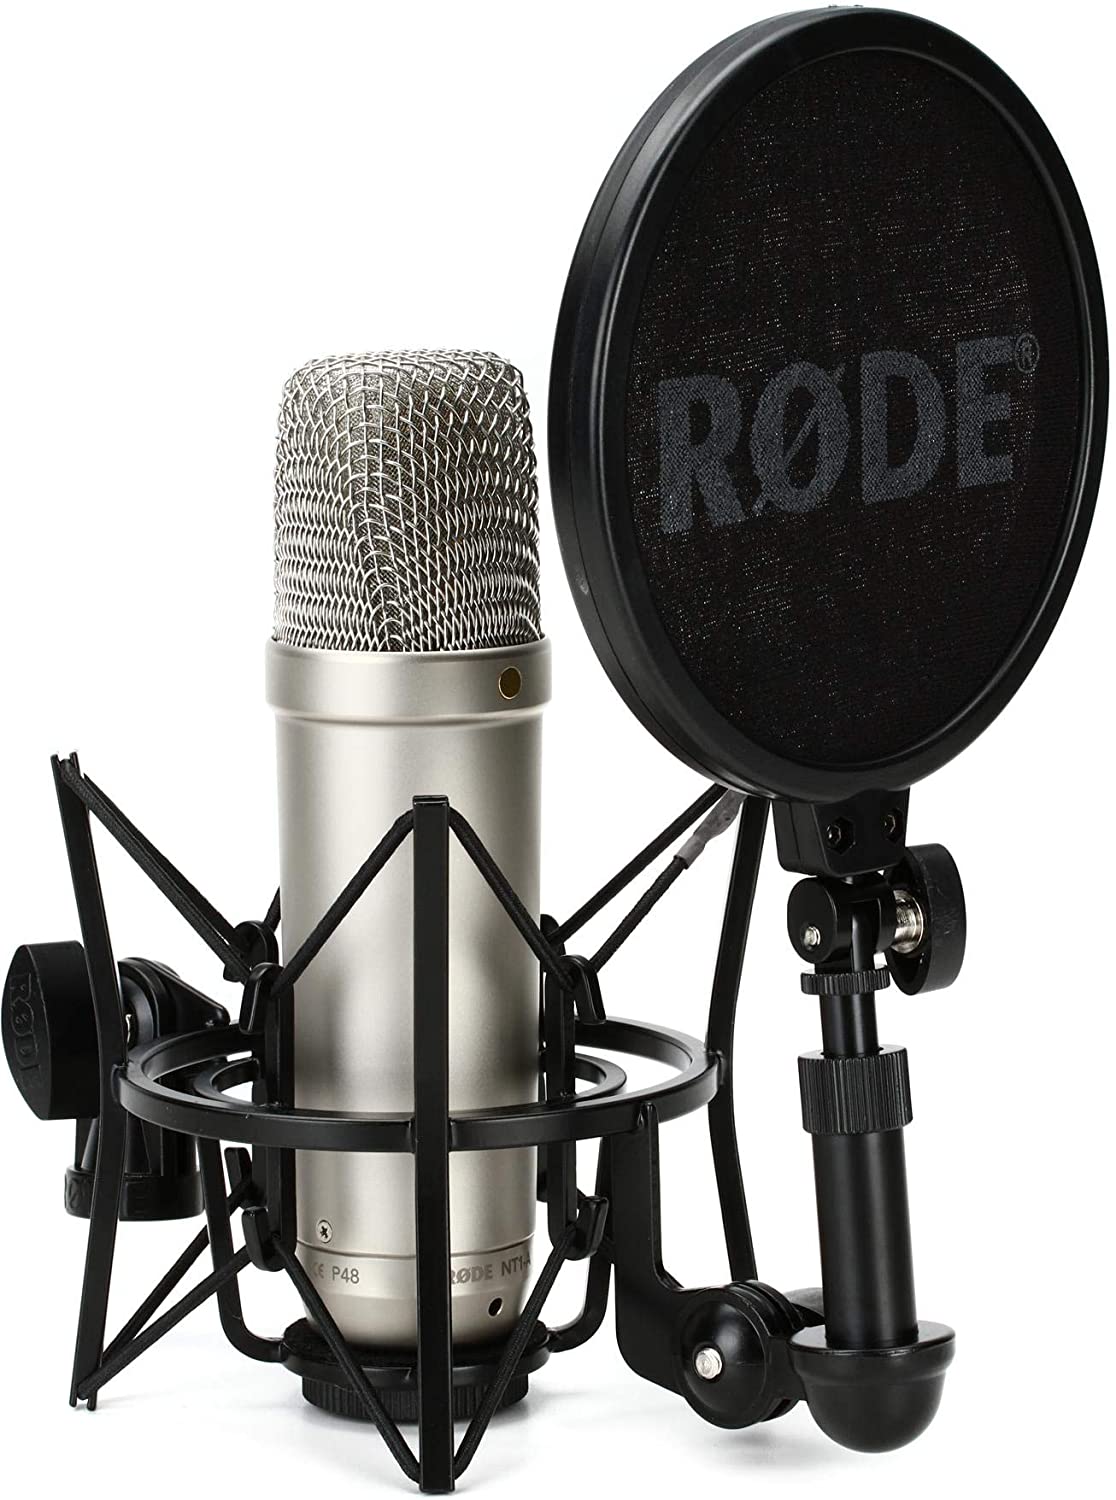 Professional microphone for home recording studio.Start recording voice overs from home.